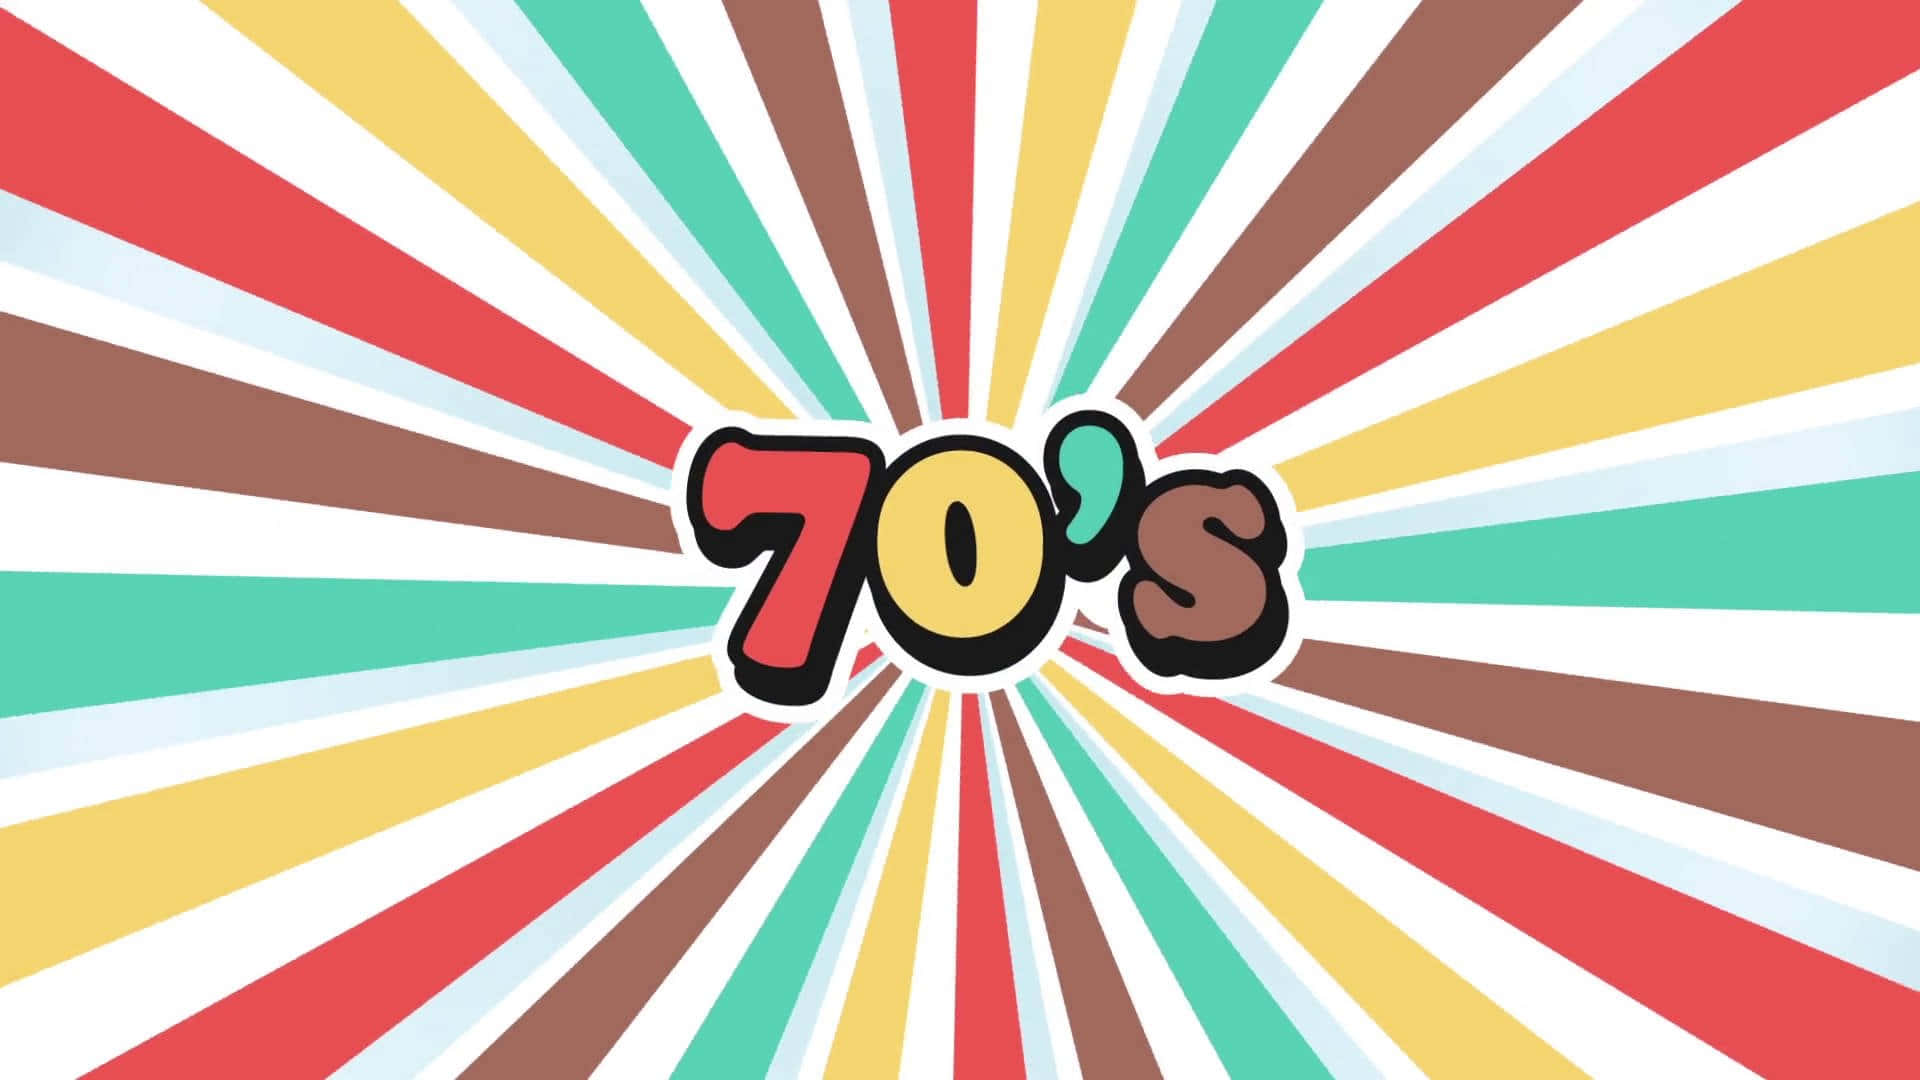 70's - A Colorful Striped Background With The Word 70's